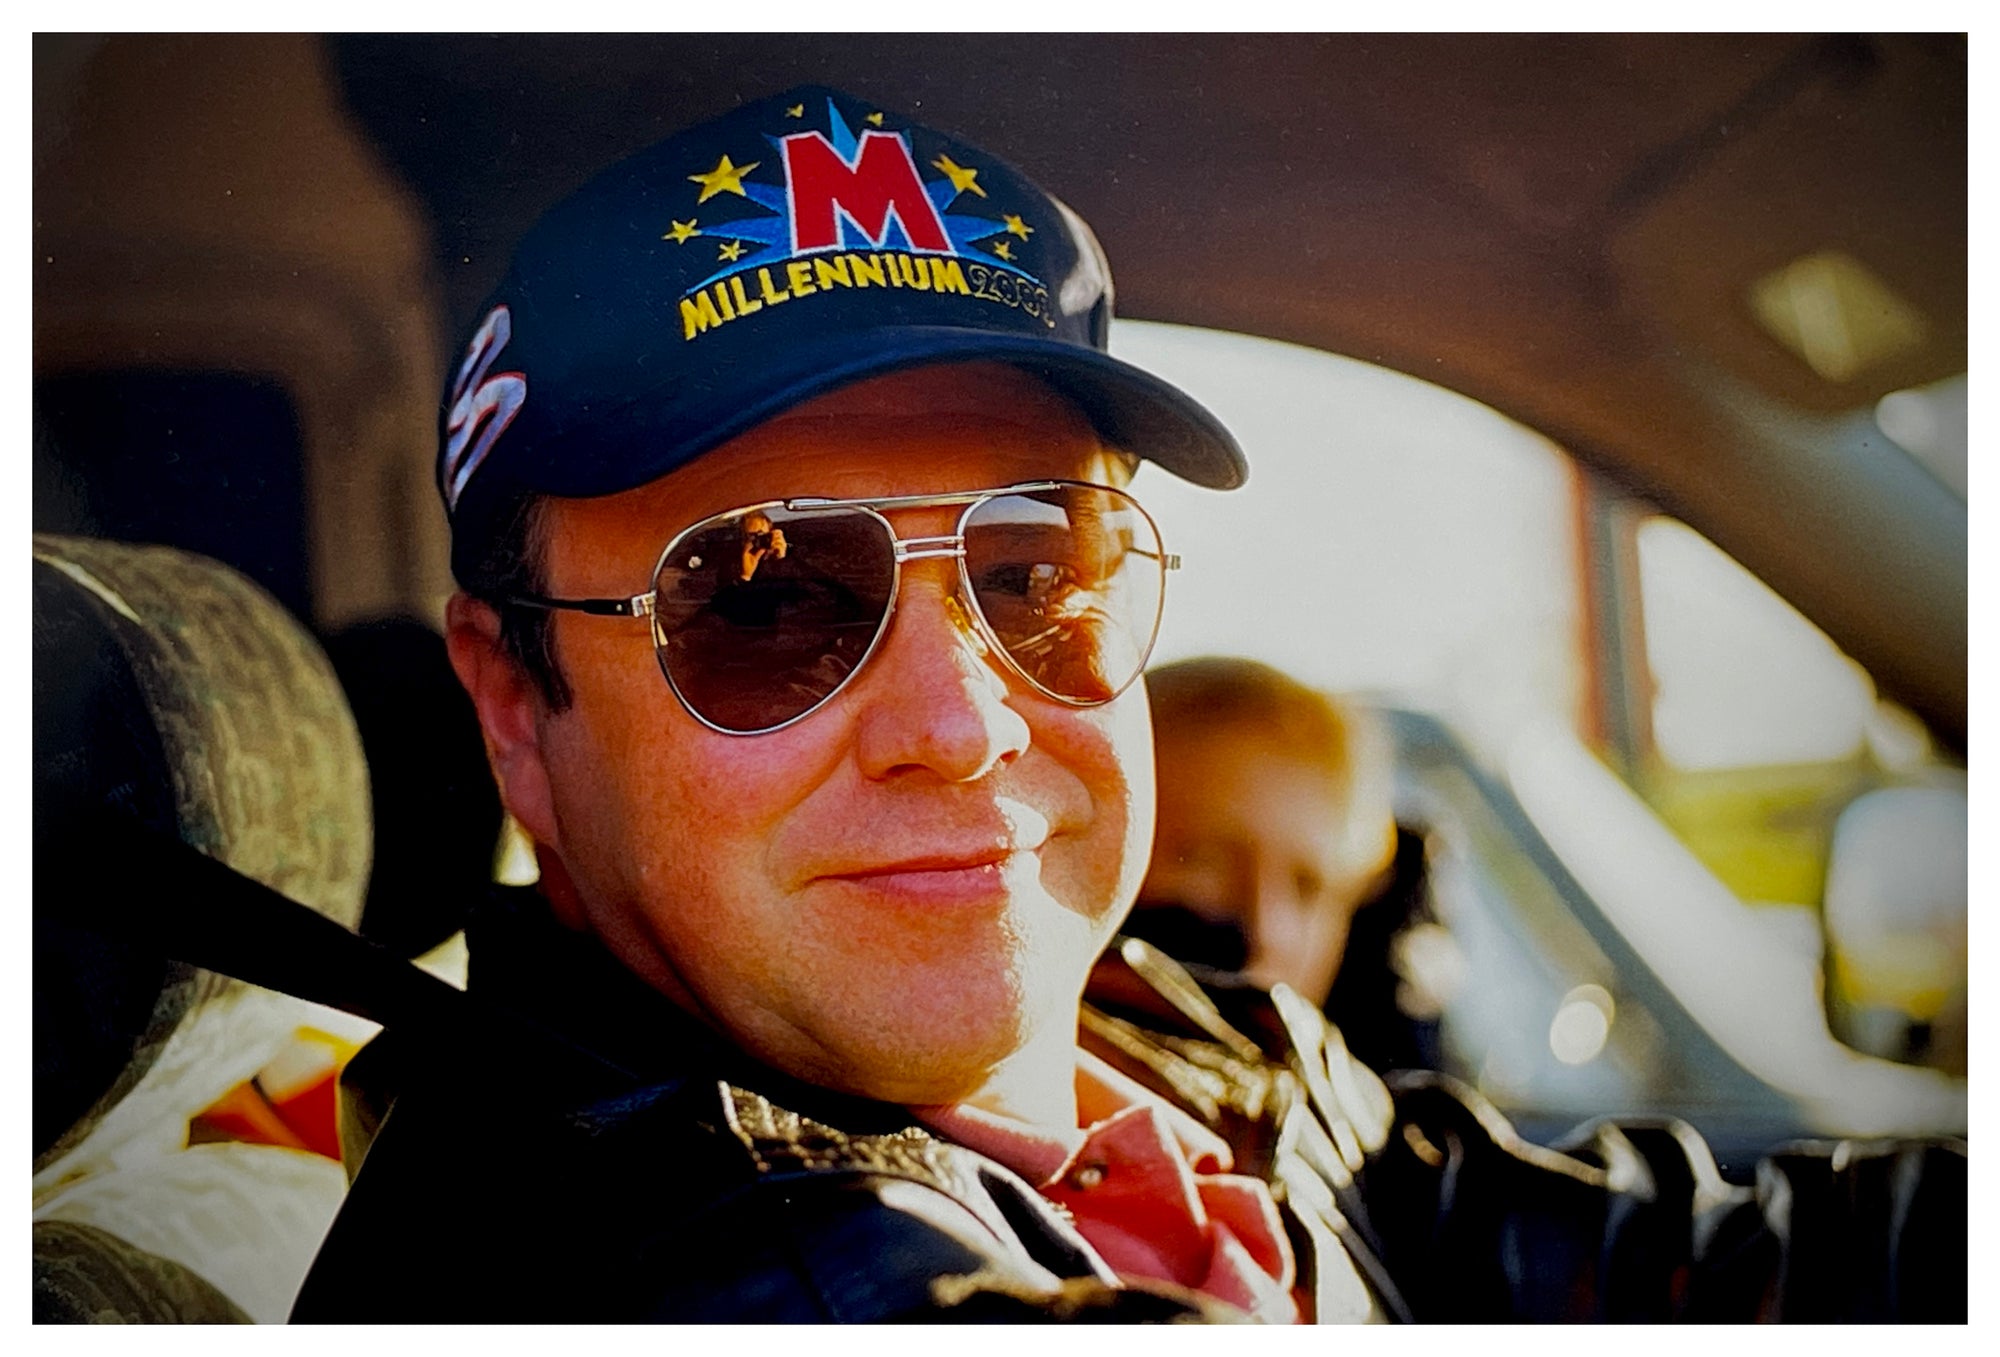 Photograph by Richard Heeps.  A smiling driver sits with brown sunglasses and a Millennium baseball hat.